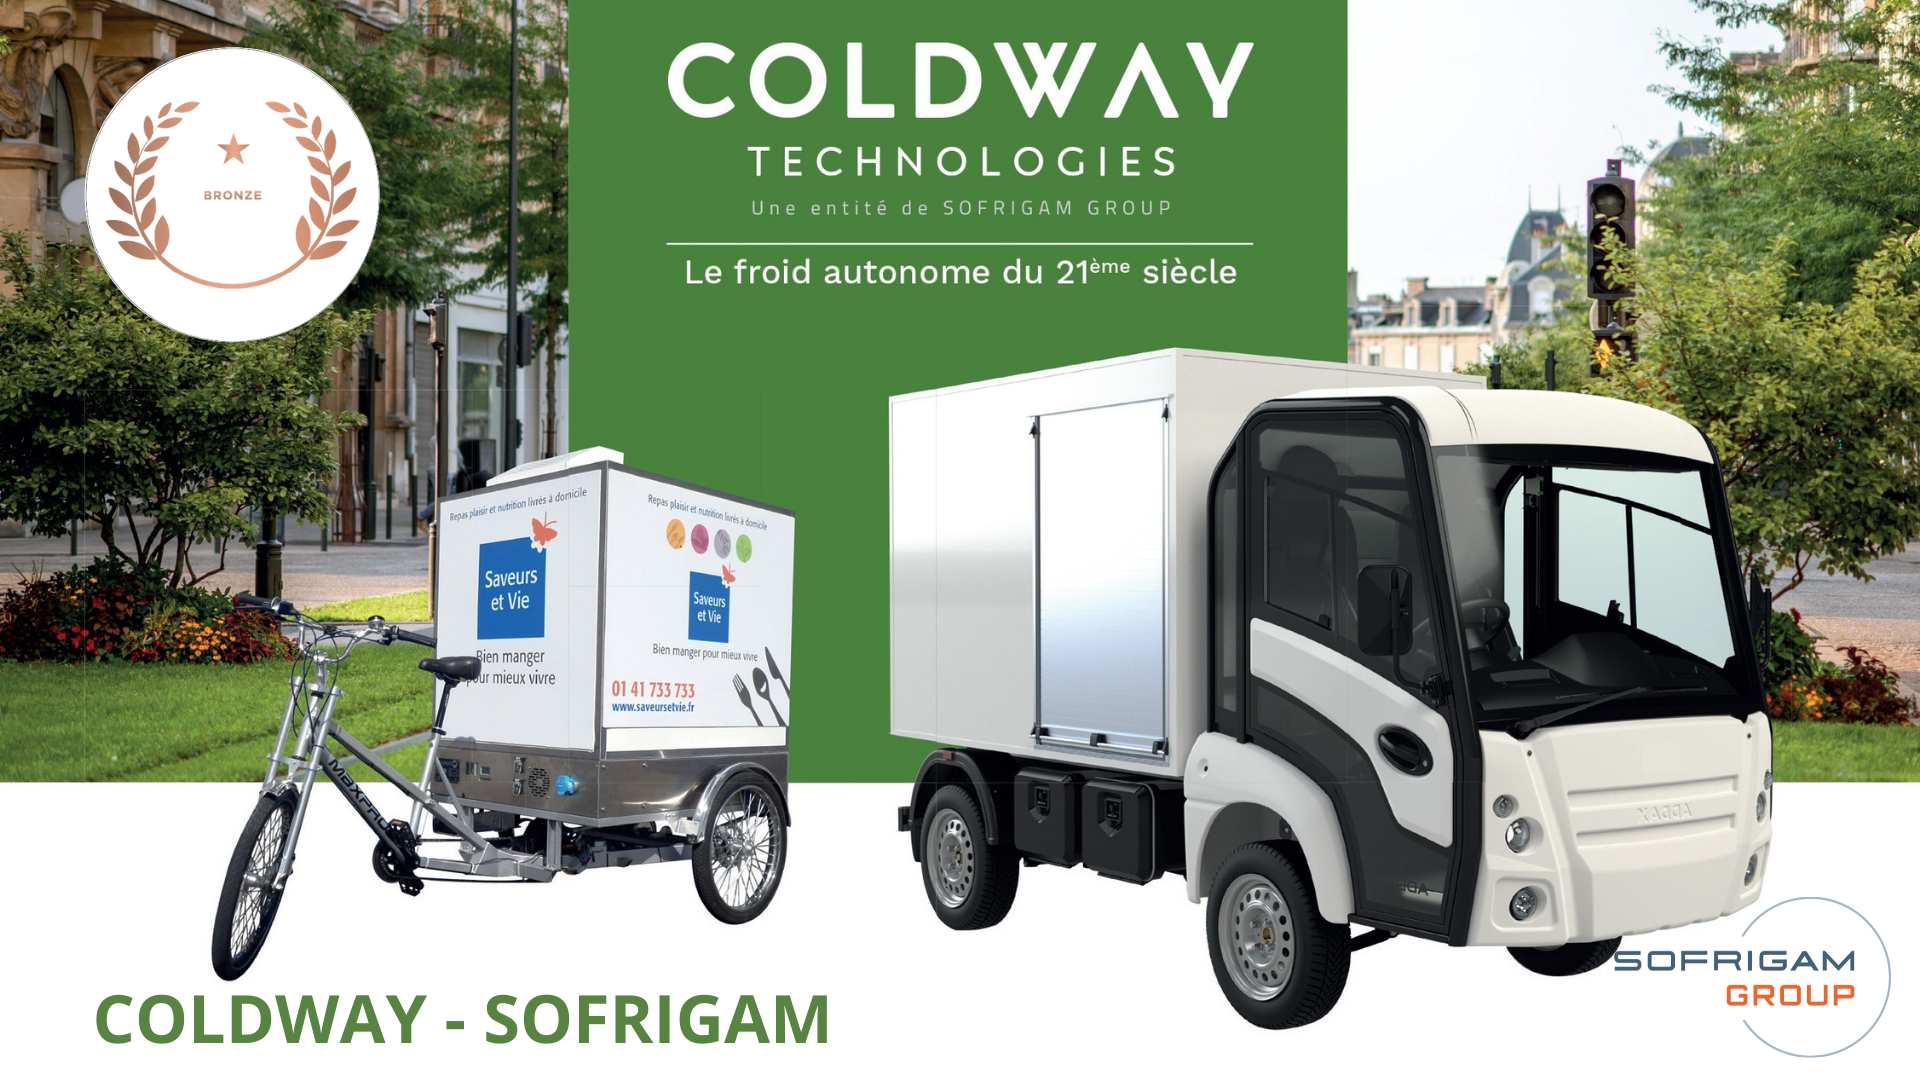 Coldway Technologies on-board cooling technology